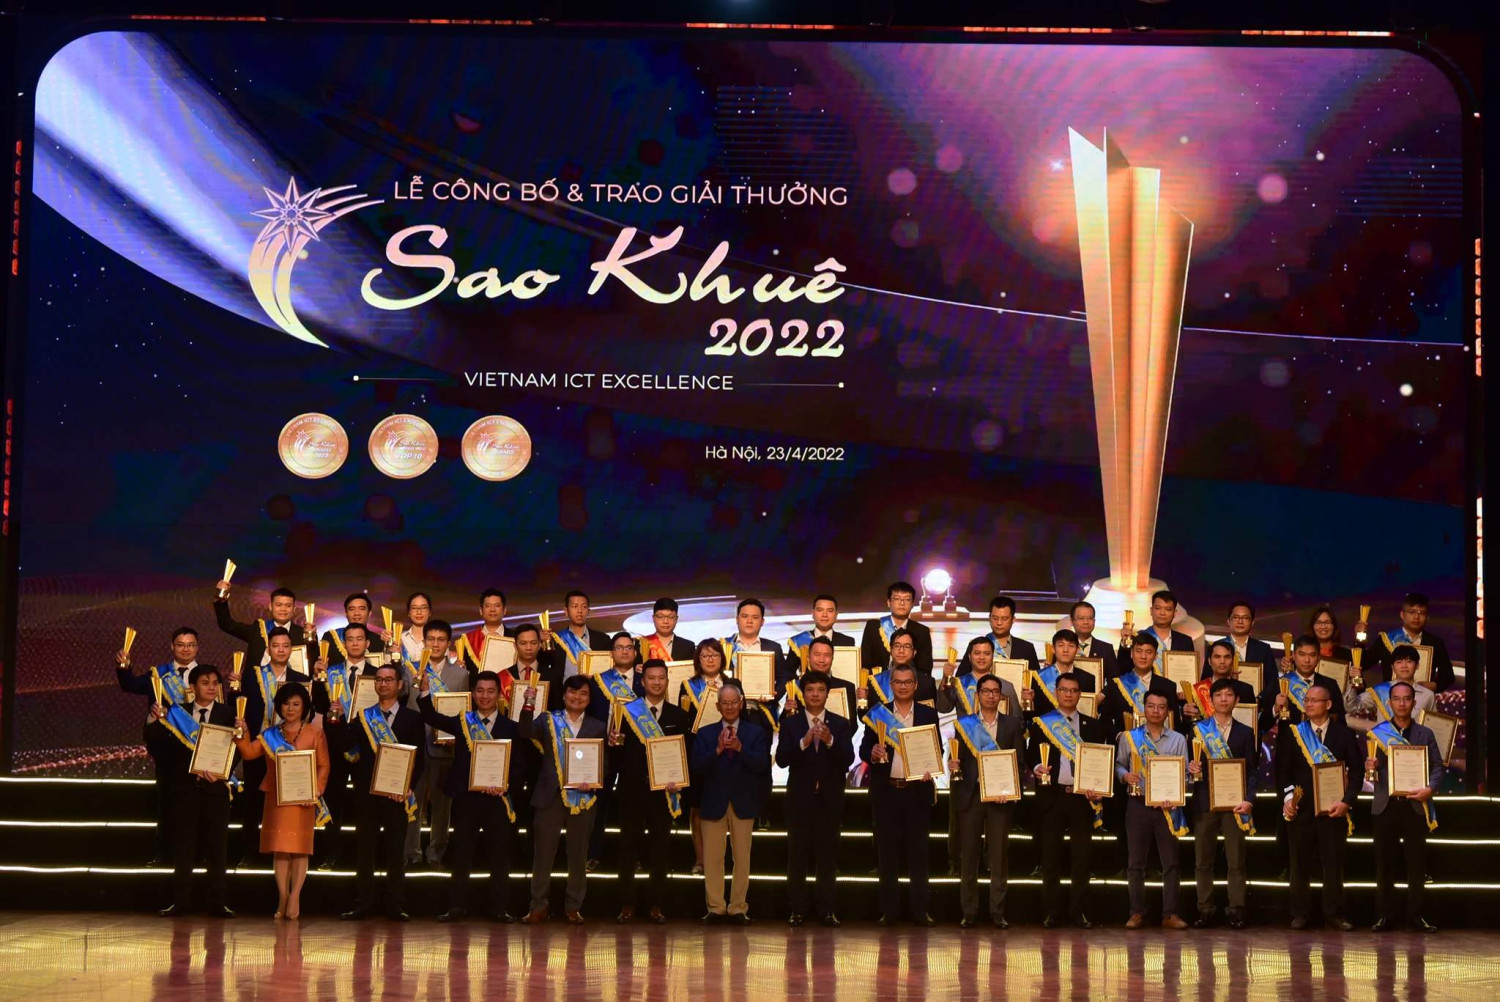 DauThau Net and business representatives in the IT industry received the Sao Khue 2022 award